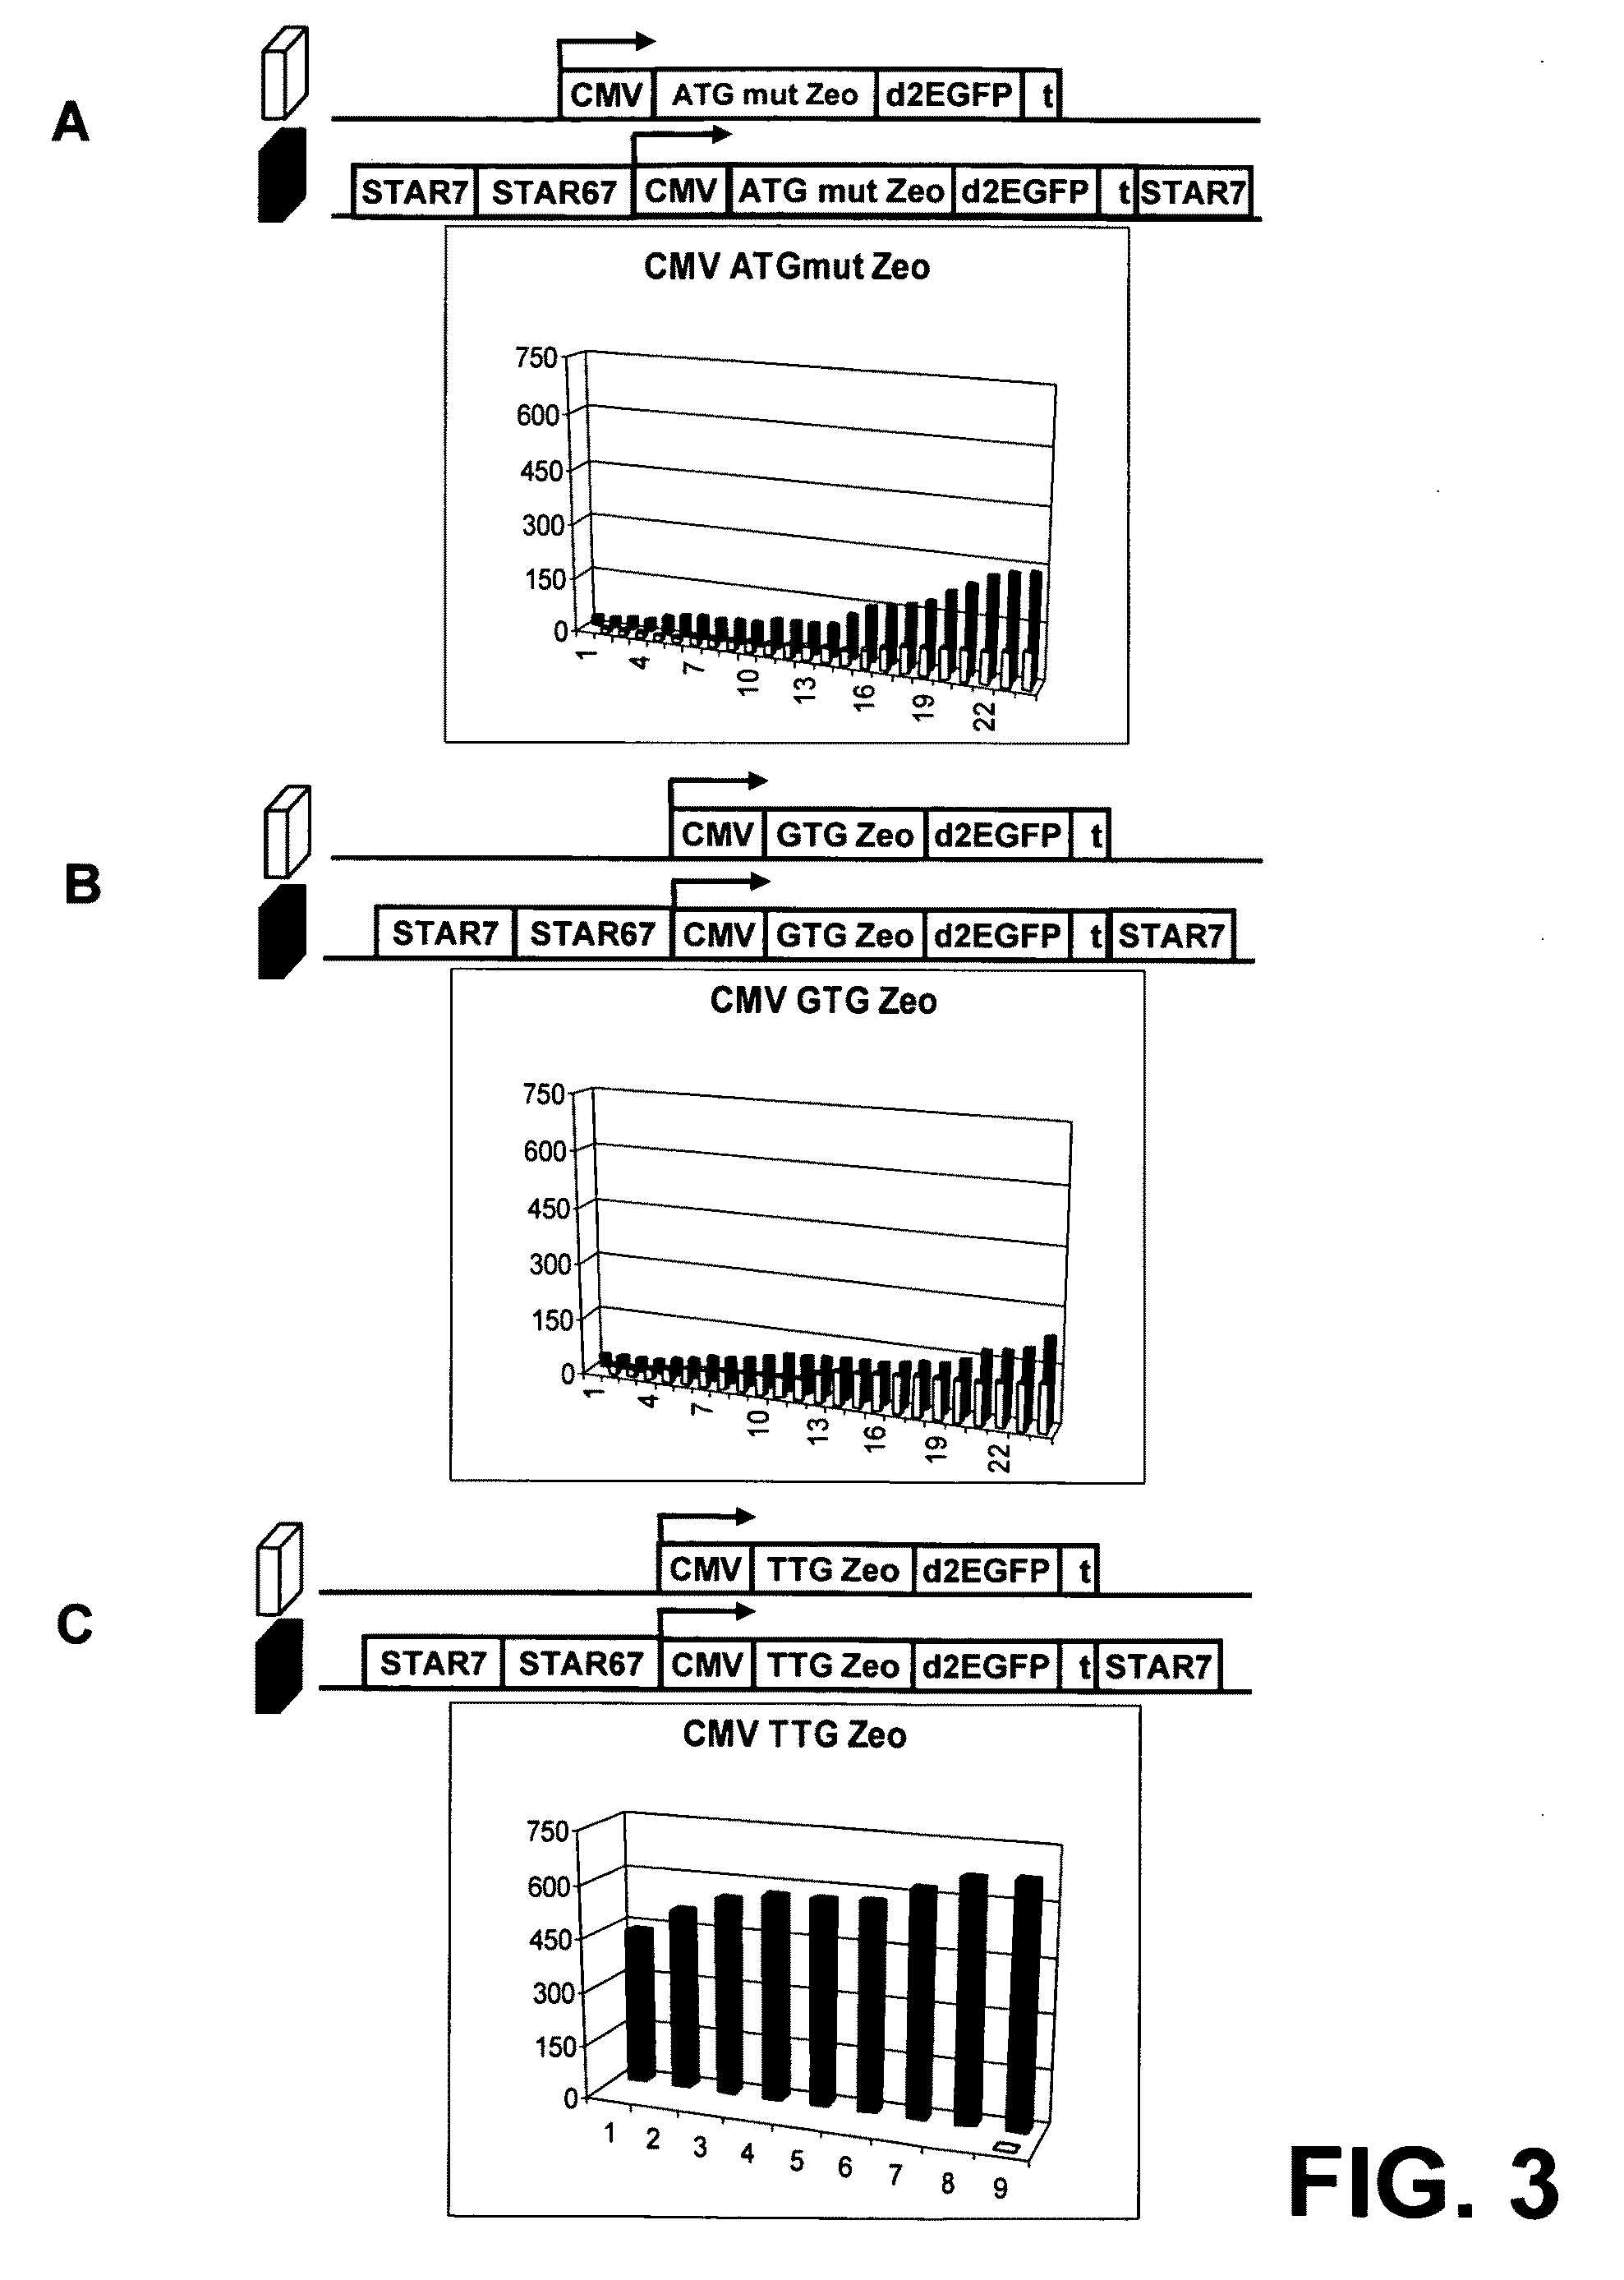 Selection of host cells expressing protein at high levels